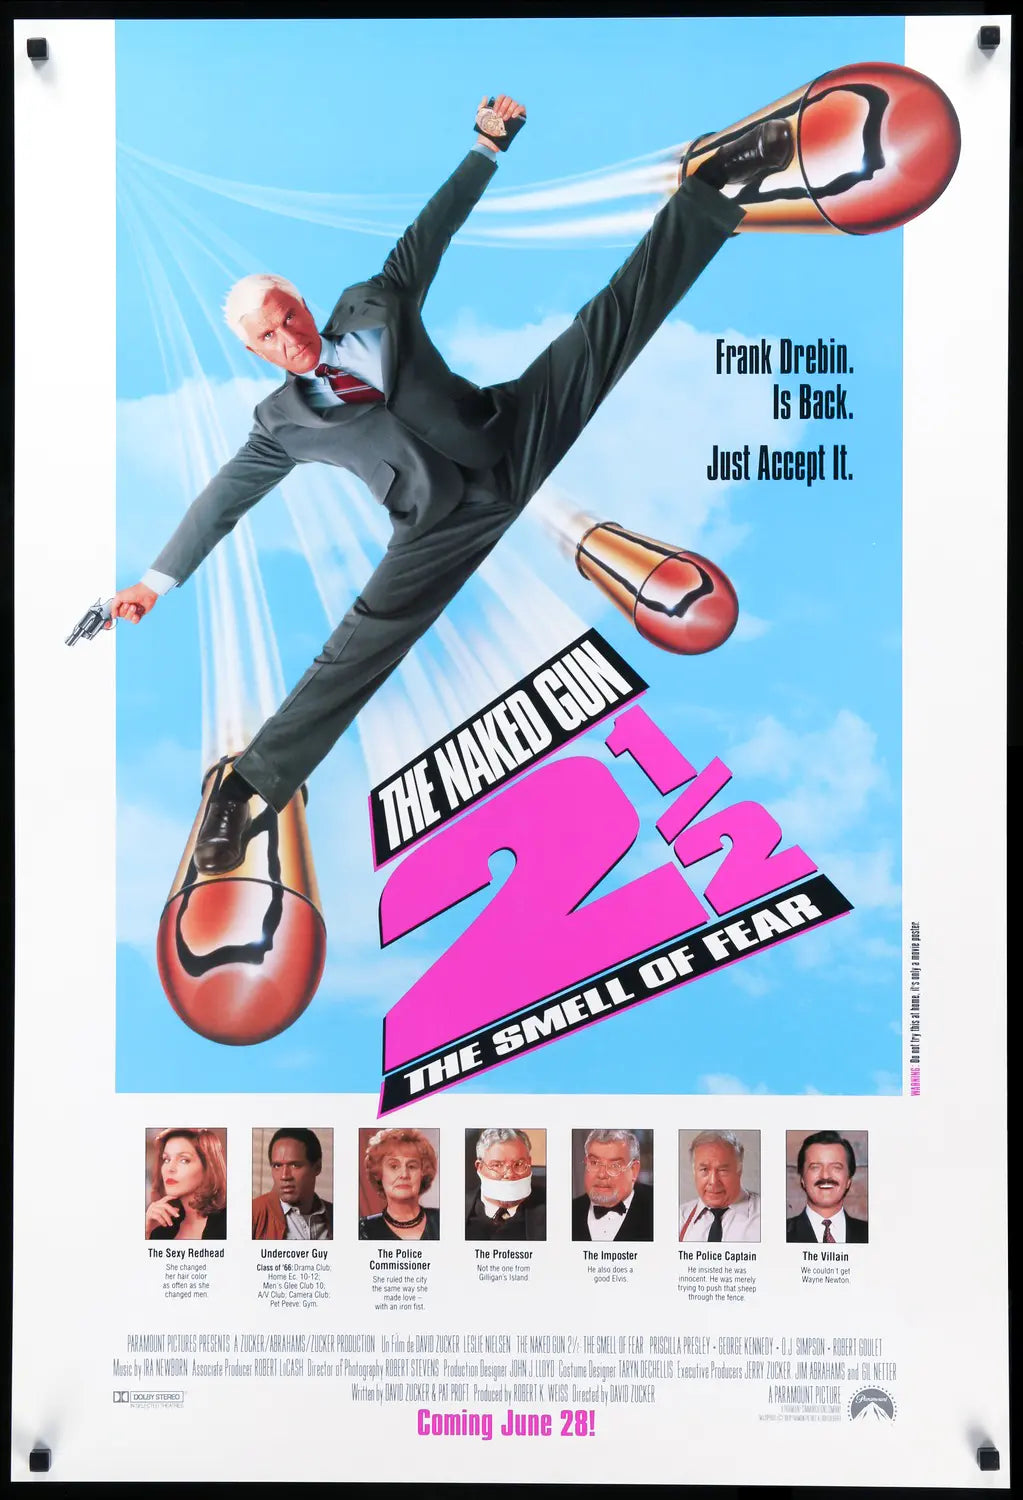 Naked Gun 2 1/2: The Smell of Fear (1991) original movie poster for sale at Original Film Art